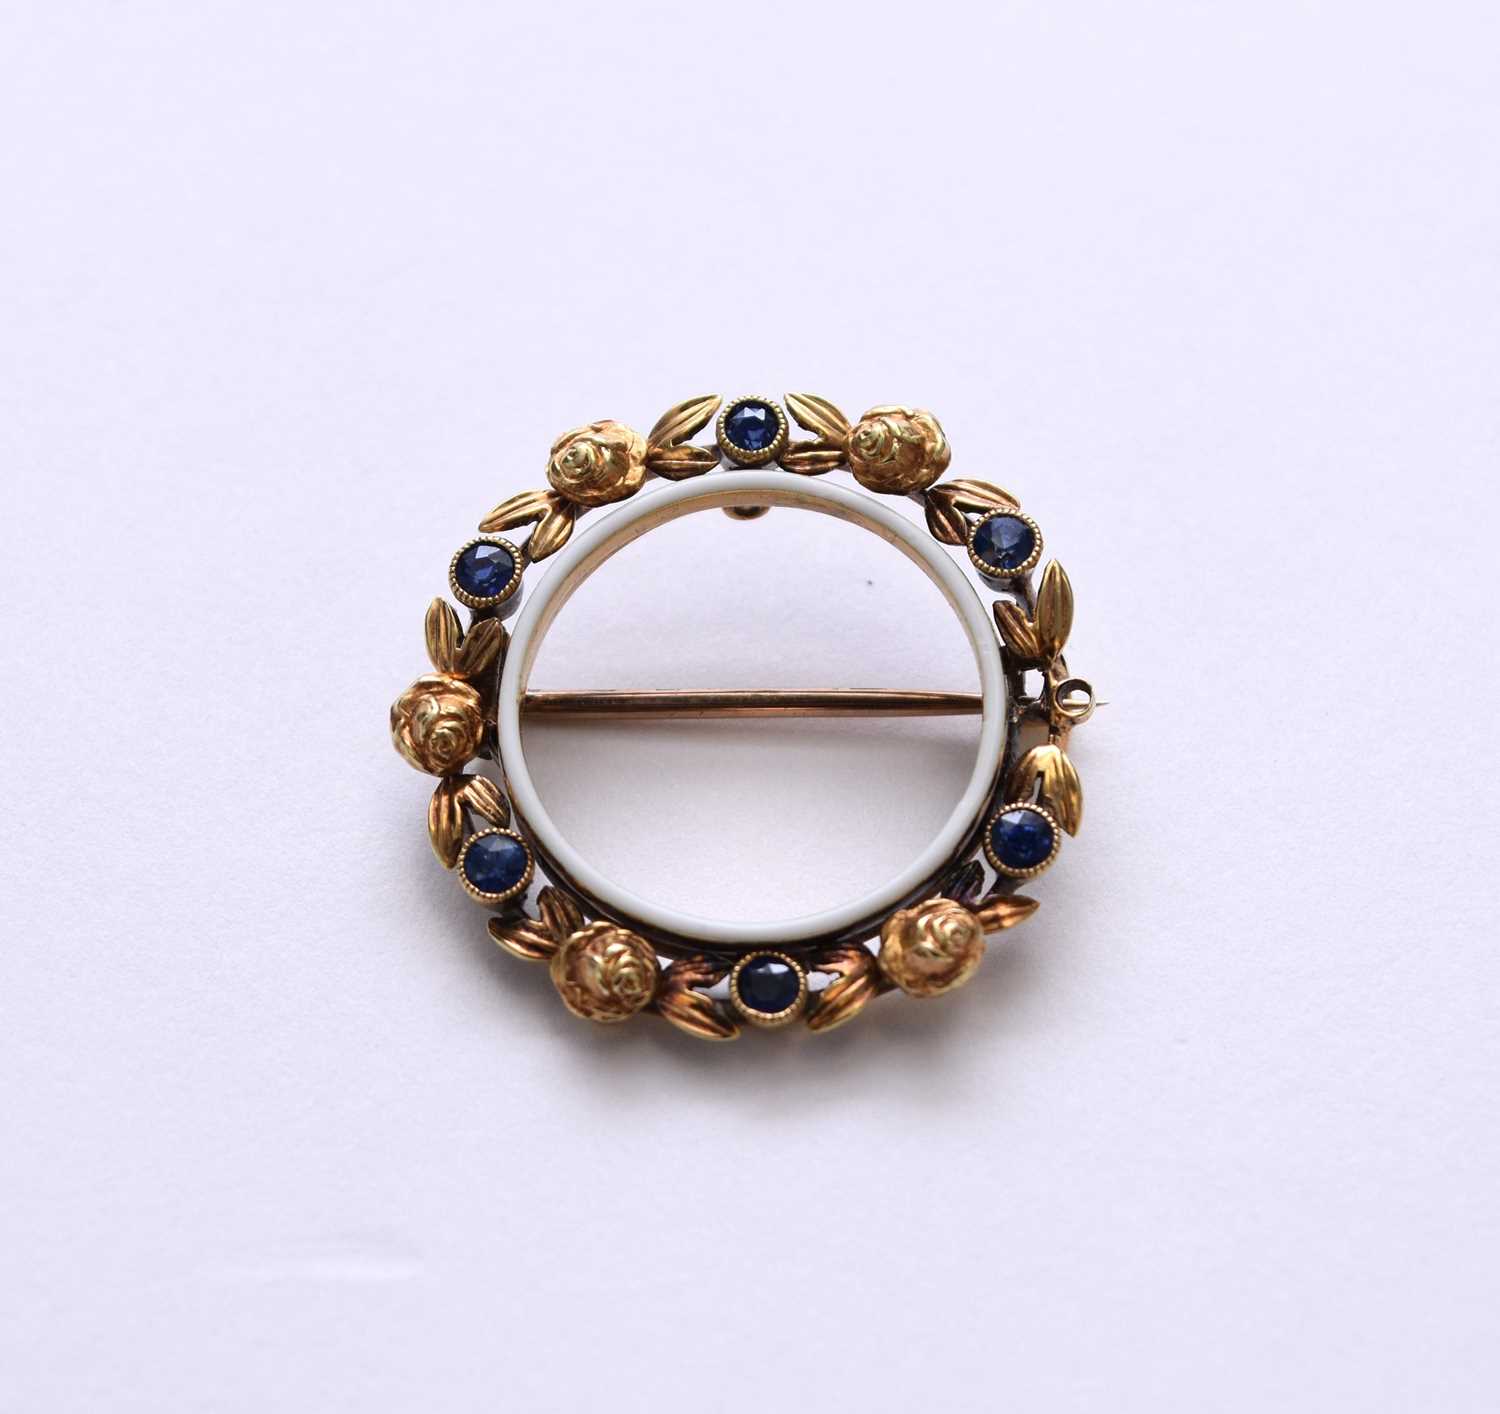 Lot 71 - A late 19th/early 20th century sapphire and enamel brooch